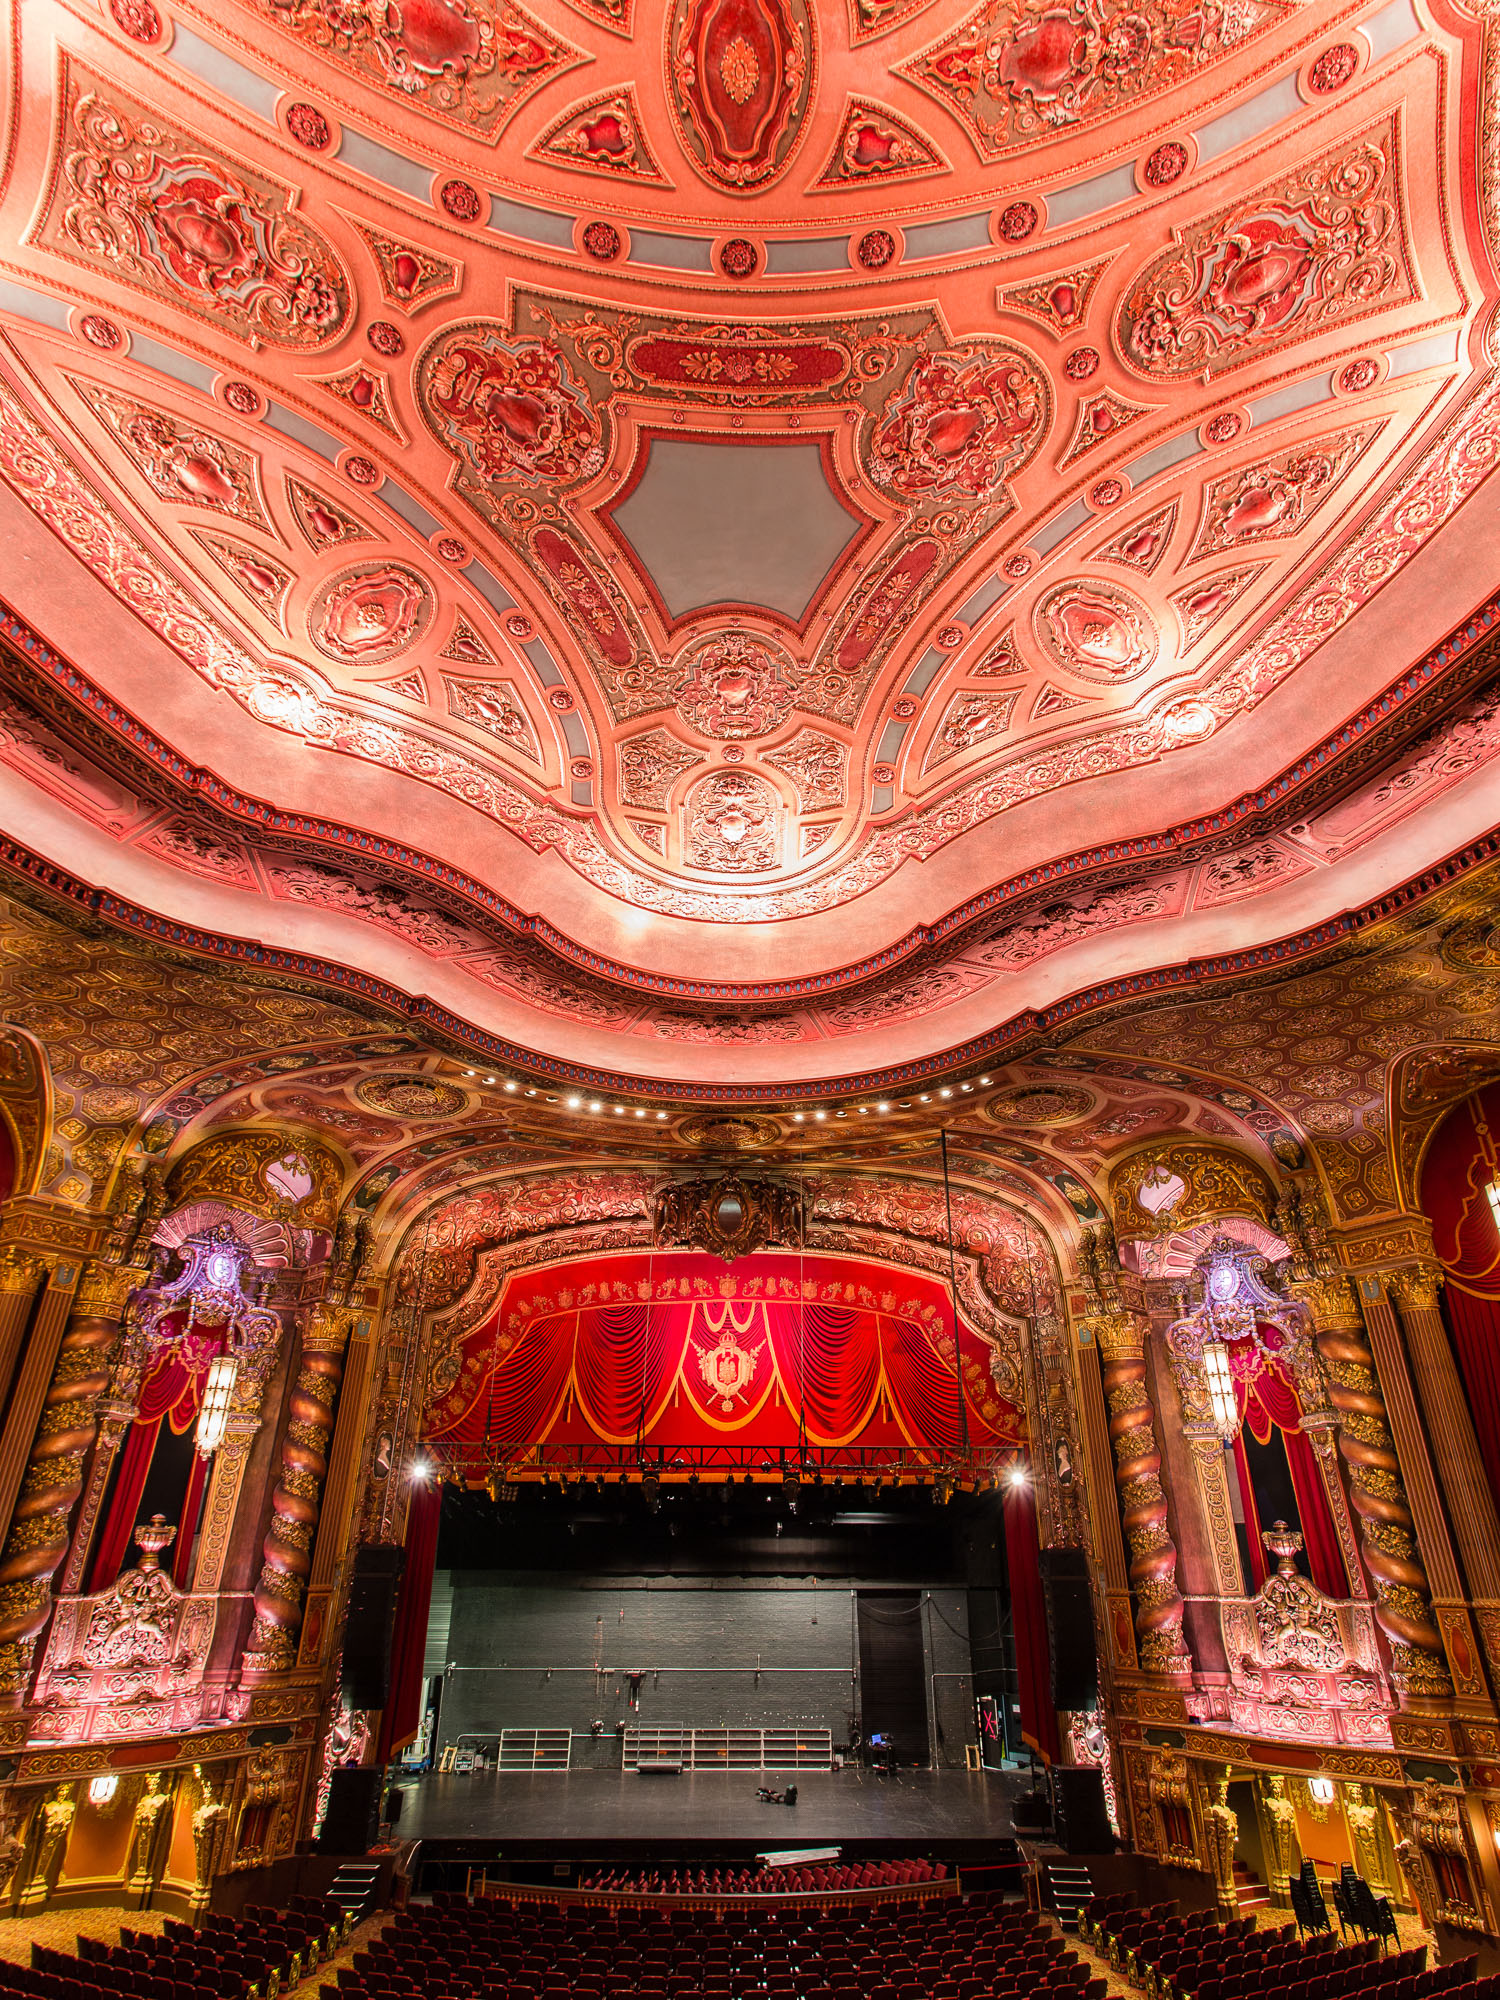 Interior of the Kings Theatre, originally Loew's Kings Theatre, one of five original "Loew's Wonder Theatres," opened in 1929.